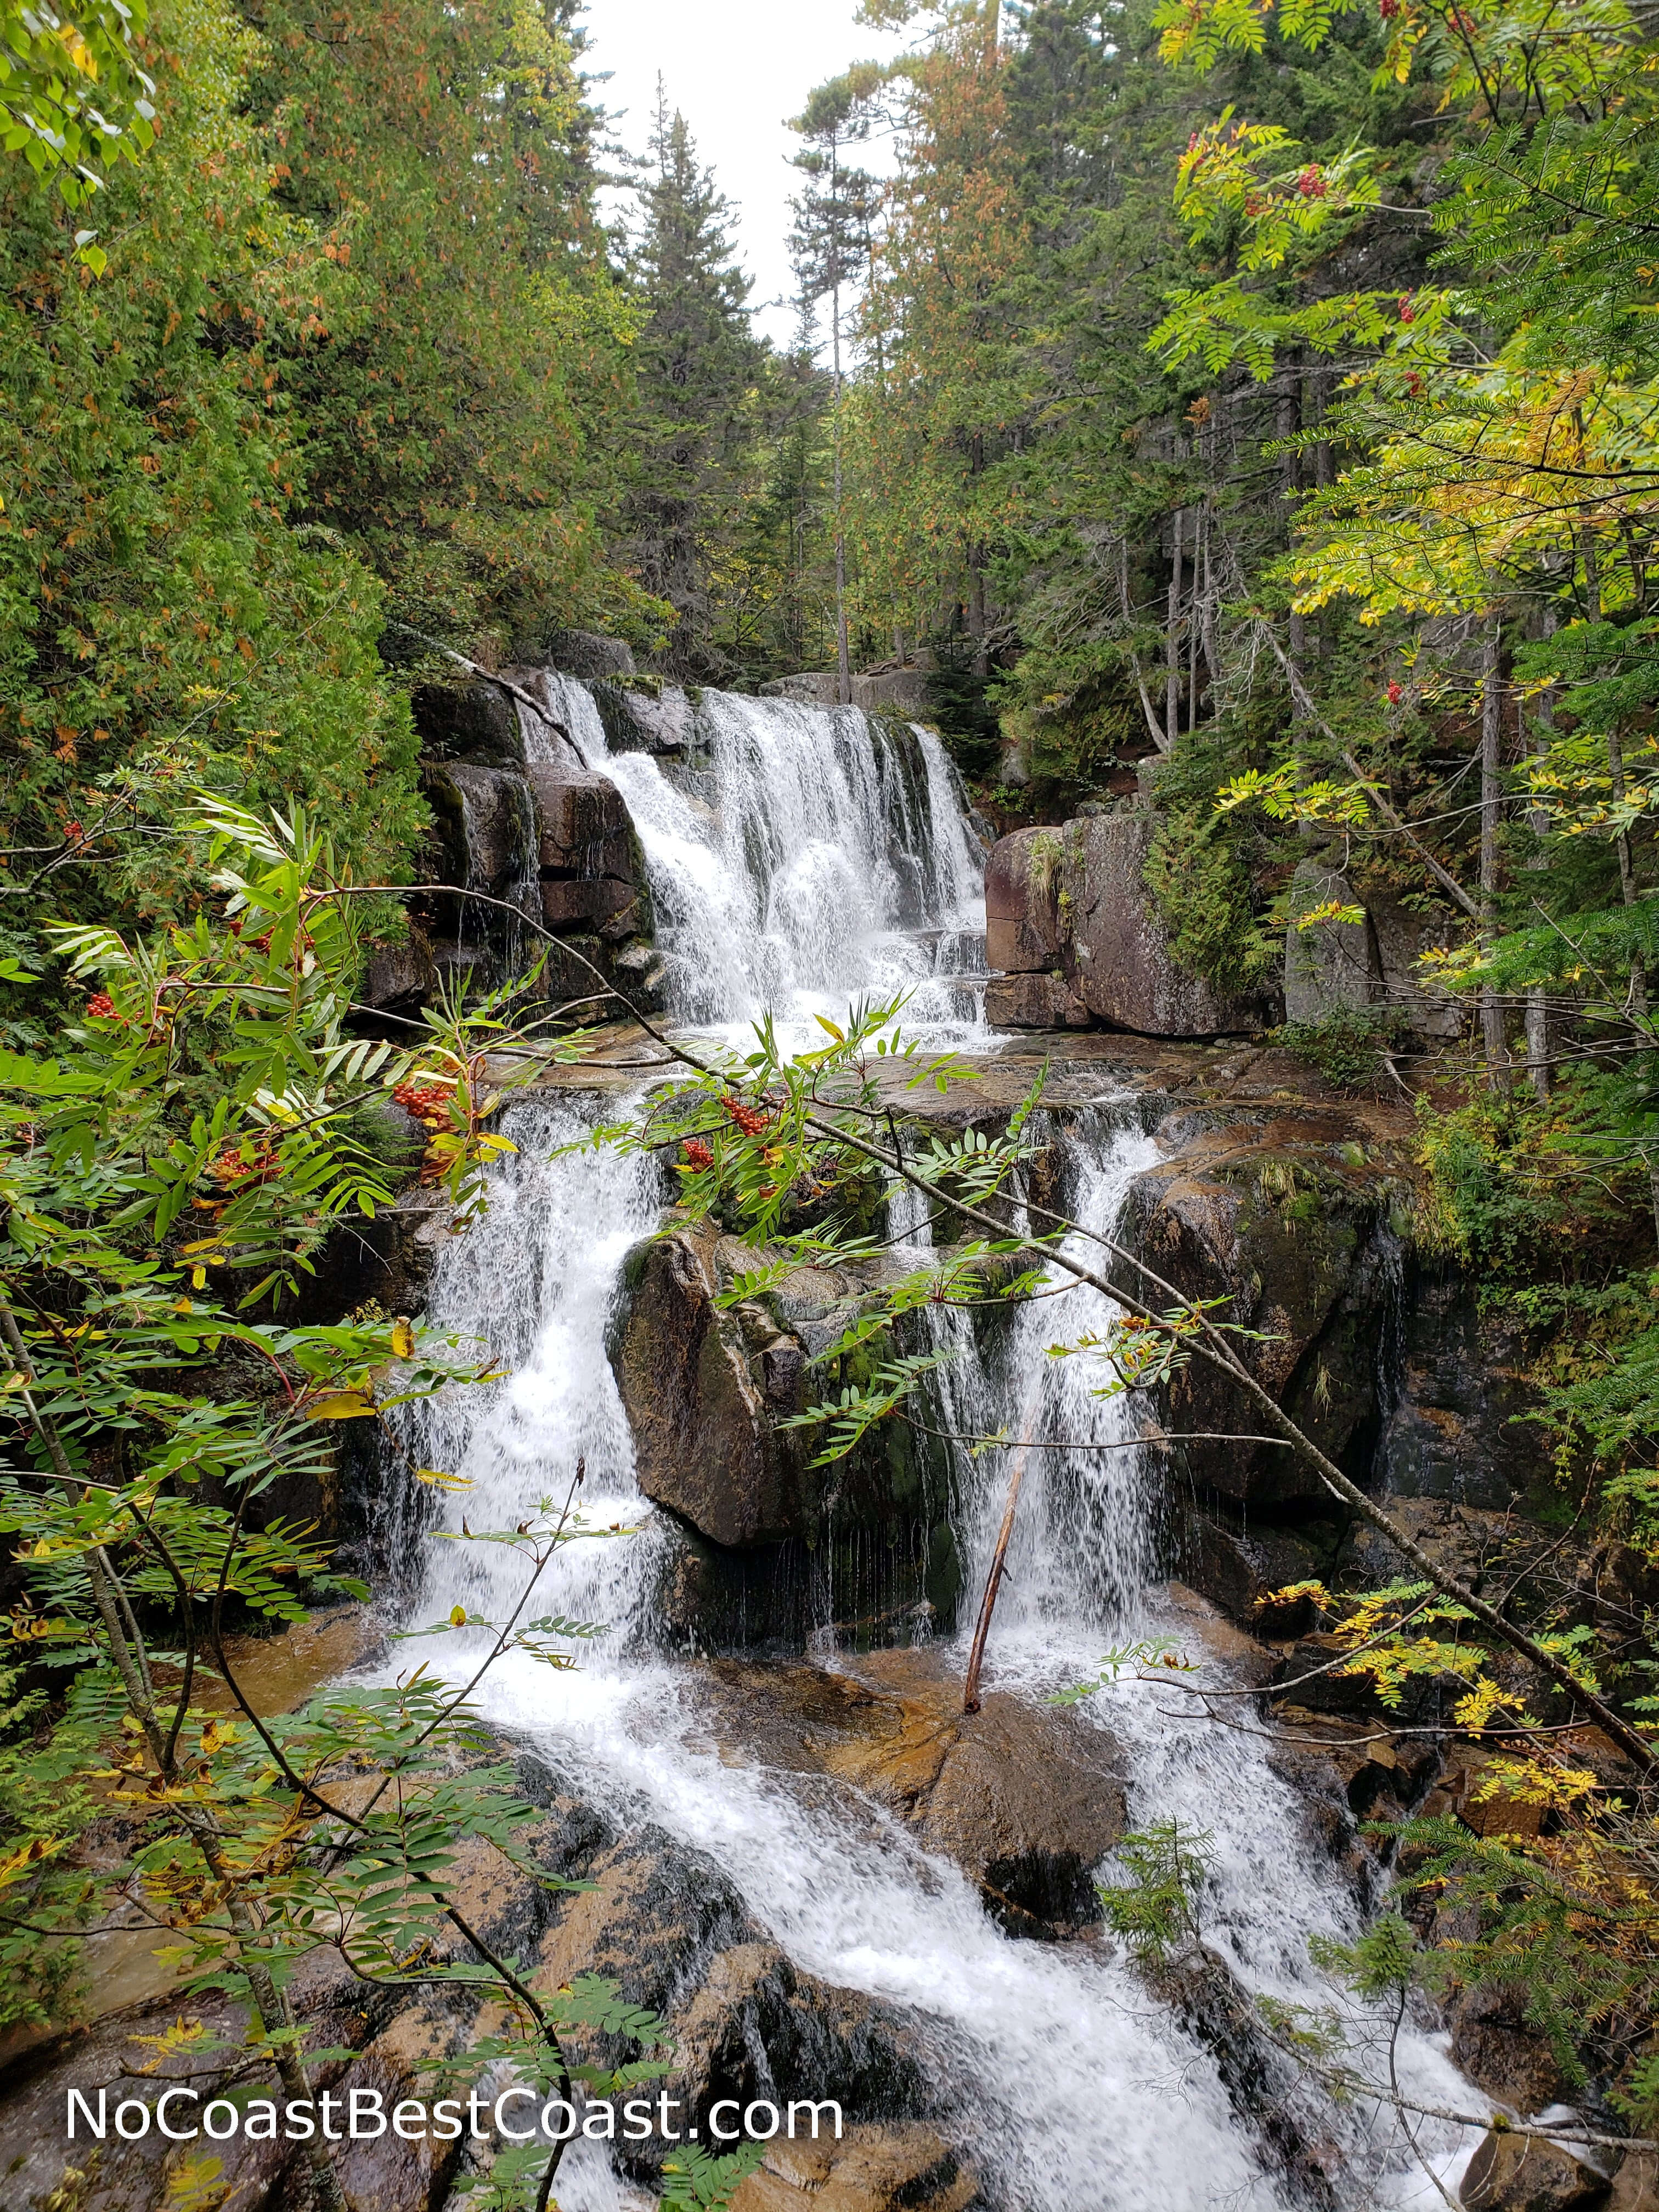 The gorgeous Katahdin Stream Falls is about a mile from the trailhead